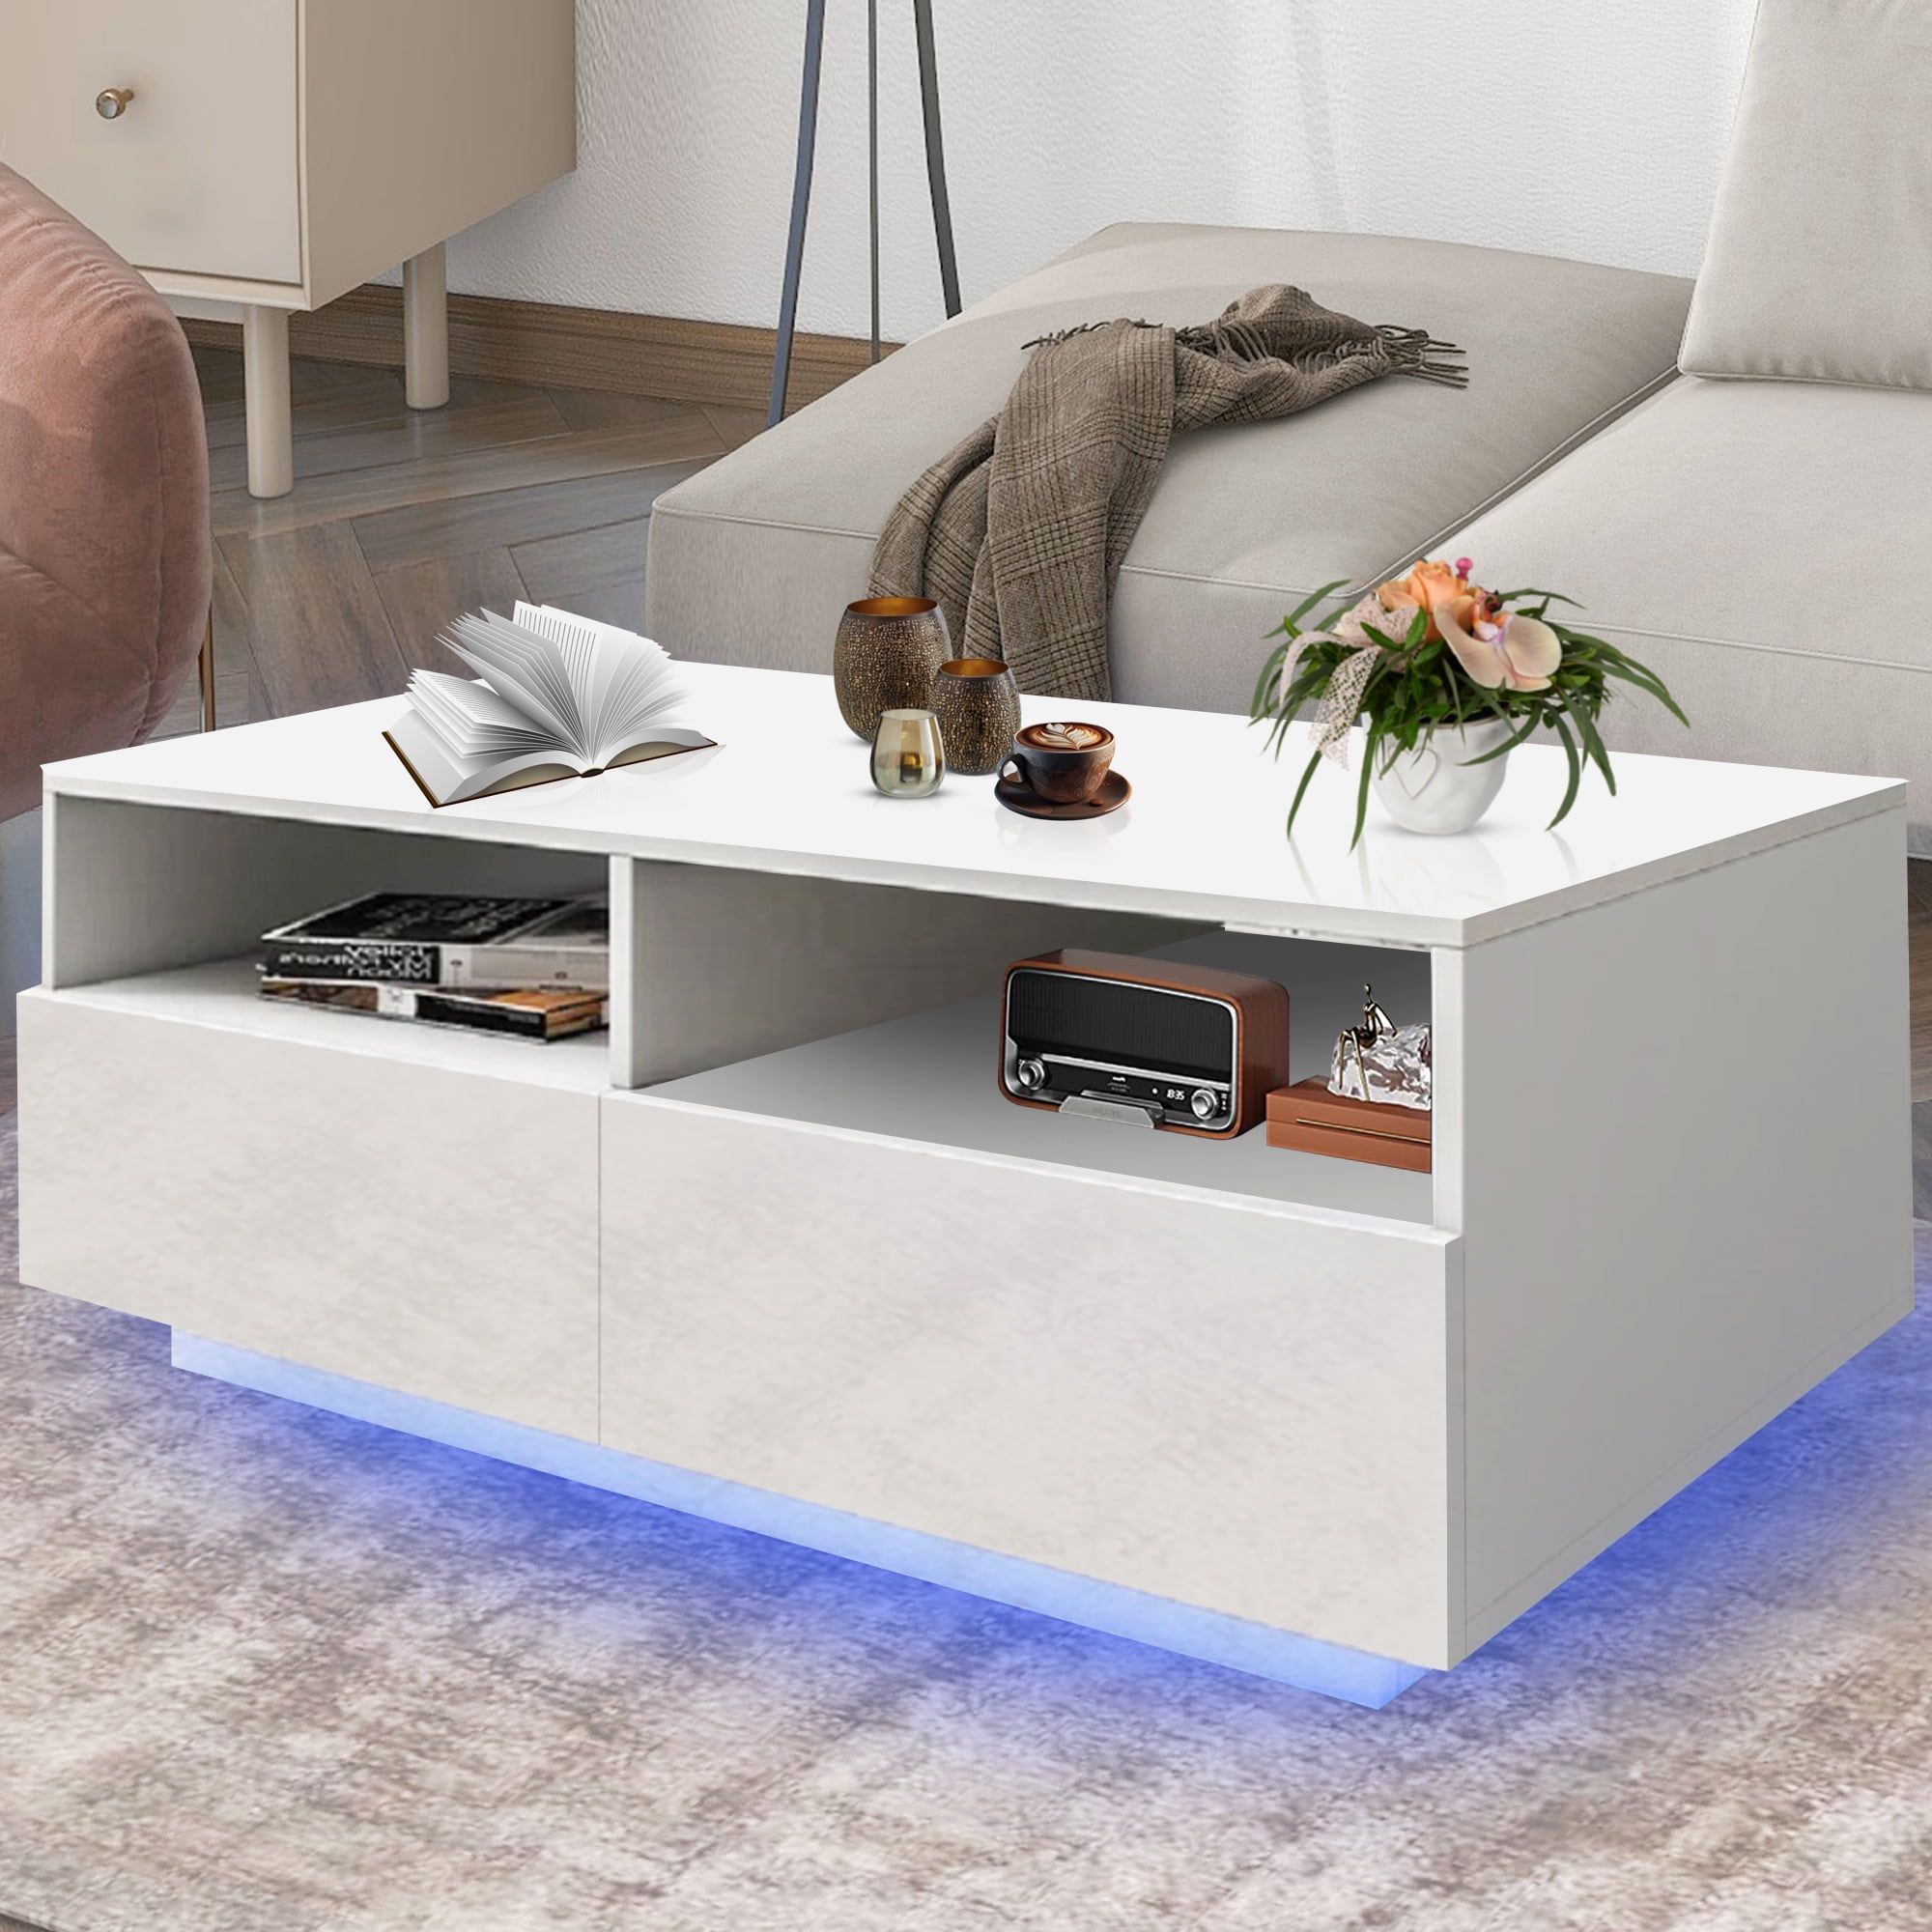 Syngar Led Coffee Table With 4 Storage Sliding Drawers And Open Shelves,  Modern High Glossy Center Table Rectangular With Multiple Colors Led Lights  For Living Room Bedroom, Easy Assembly, White – Walmart Intended For Rectangular Led Coffee Tables (View 4 of 15)